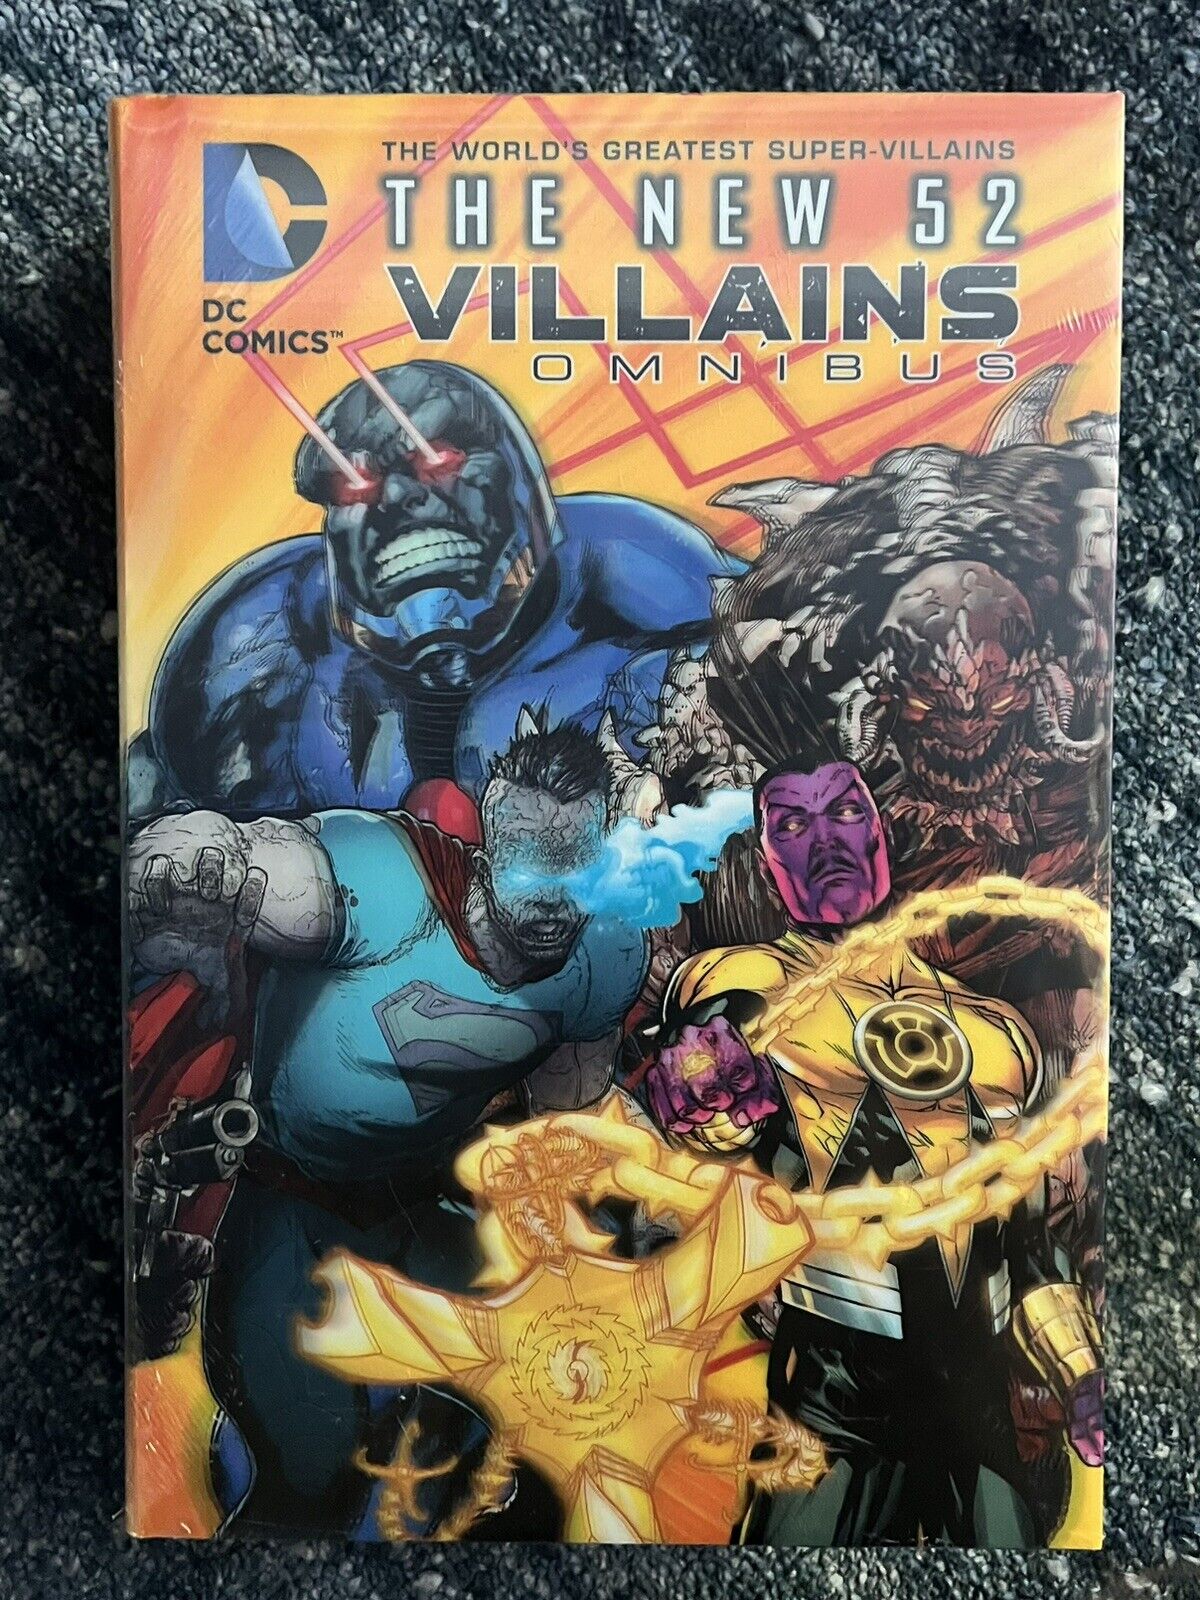 BRAND NEW FACTORY SEALED SHRINK-WRAPPED DC Comics “The New 52 Villains Omnibus”